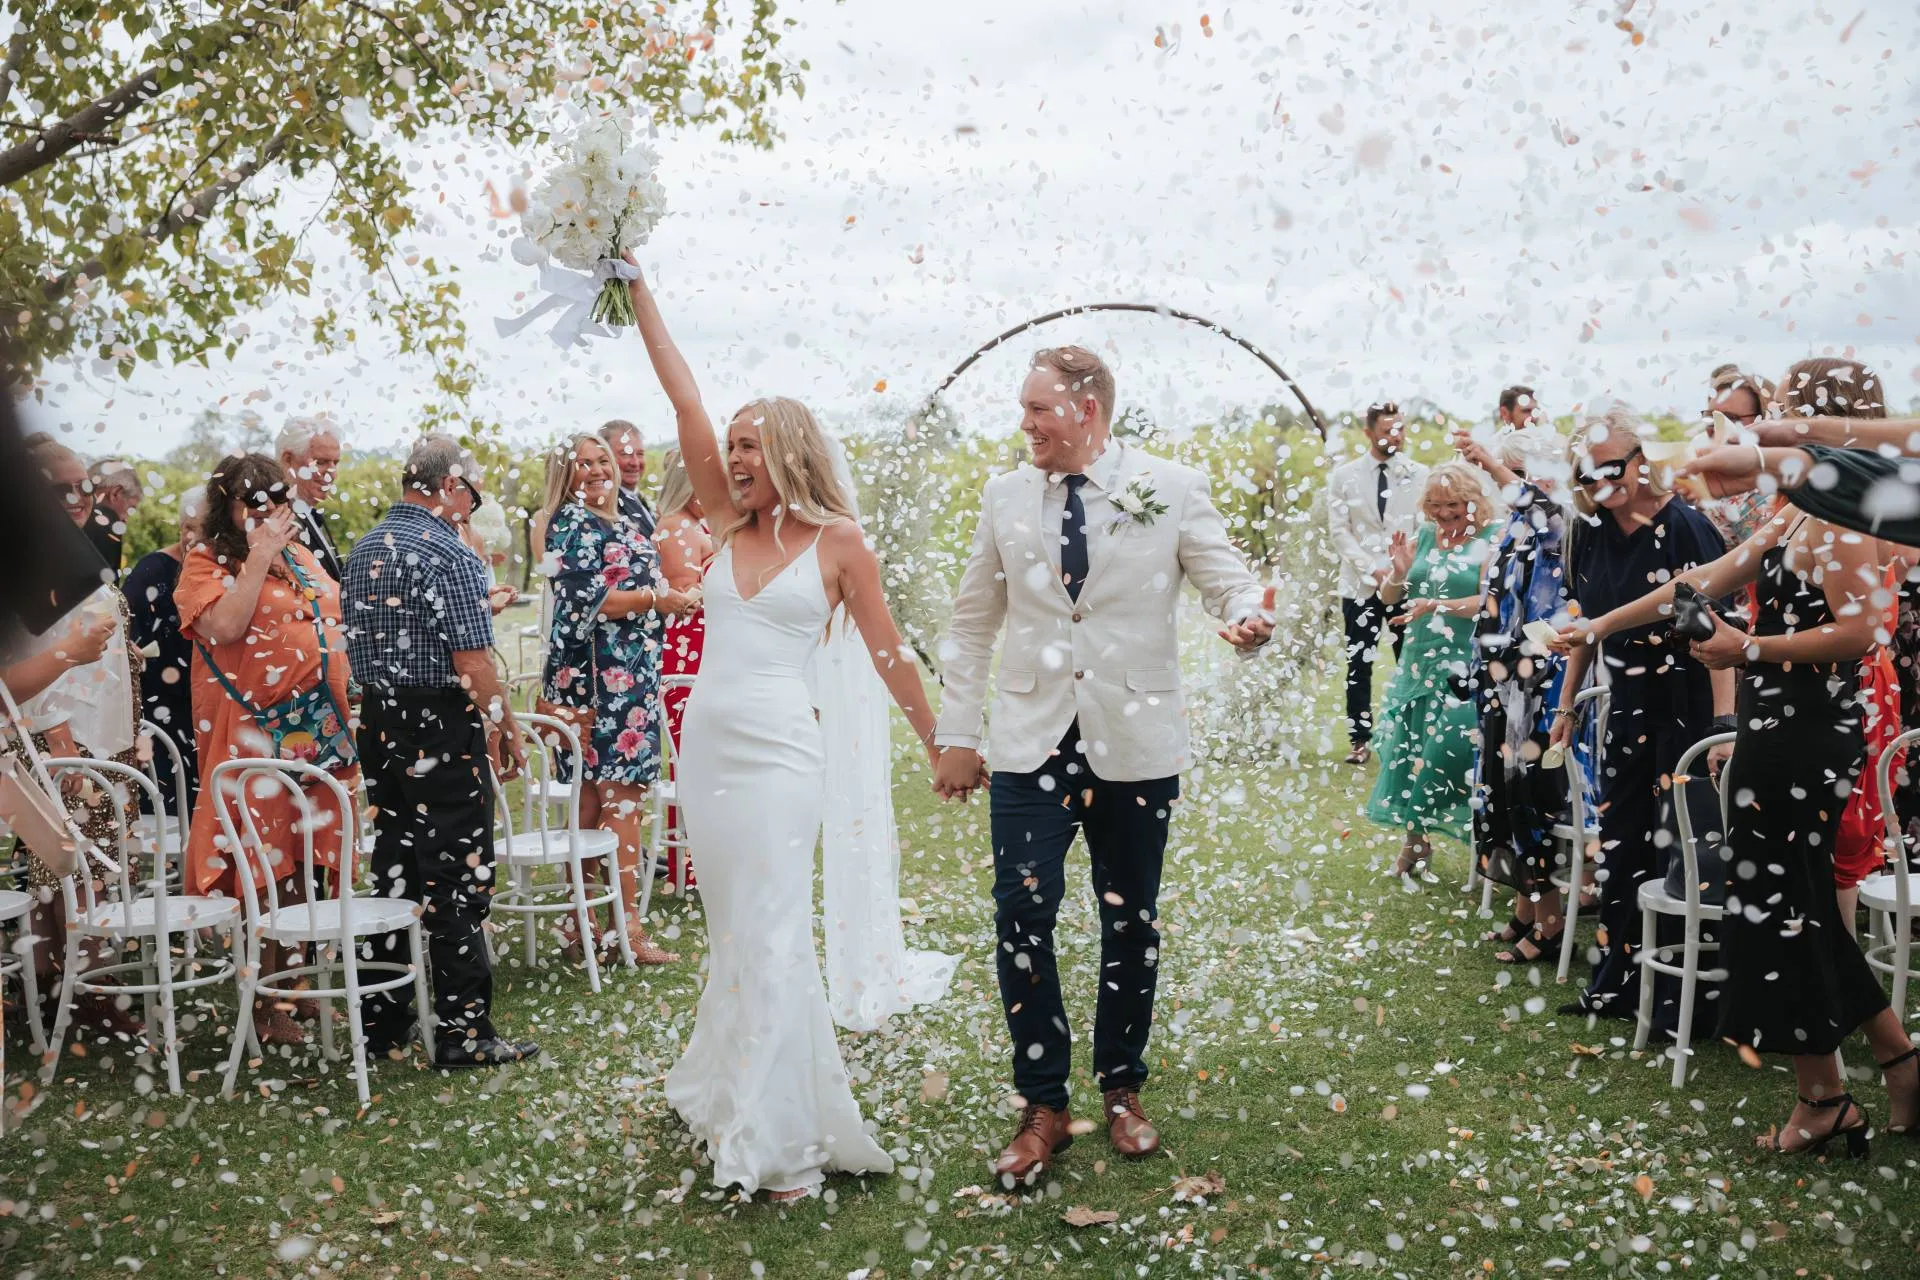 Newly wed couple celebrate walking down outdoor aisle, with confetti being thrown over them. 